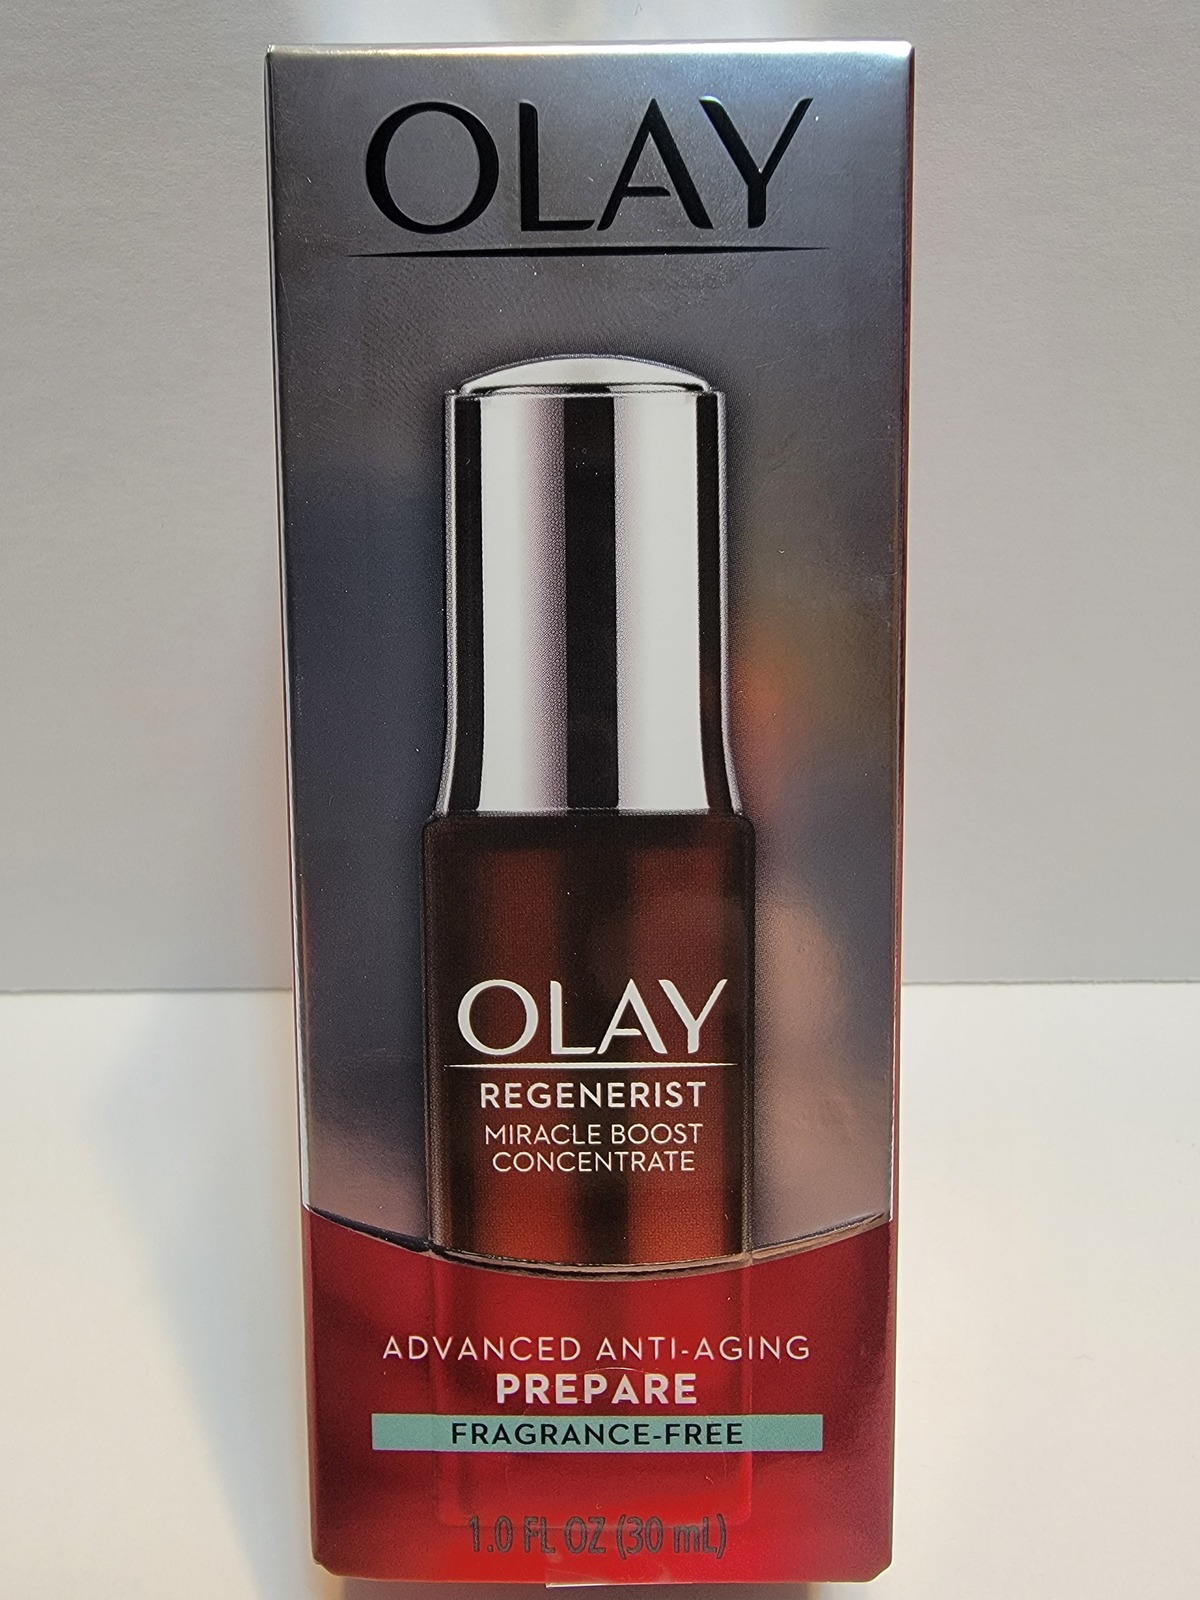 New Olay Regenerist Miracle Boost Concentrate Advanced Anti-Aging Prepare 1.0 Oz - $10.00